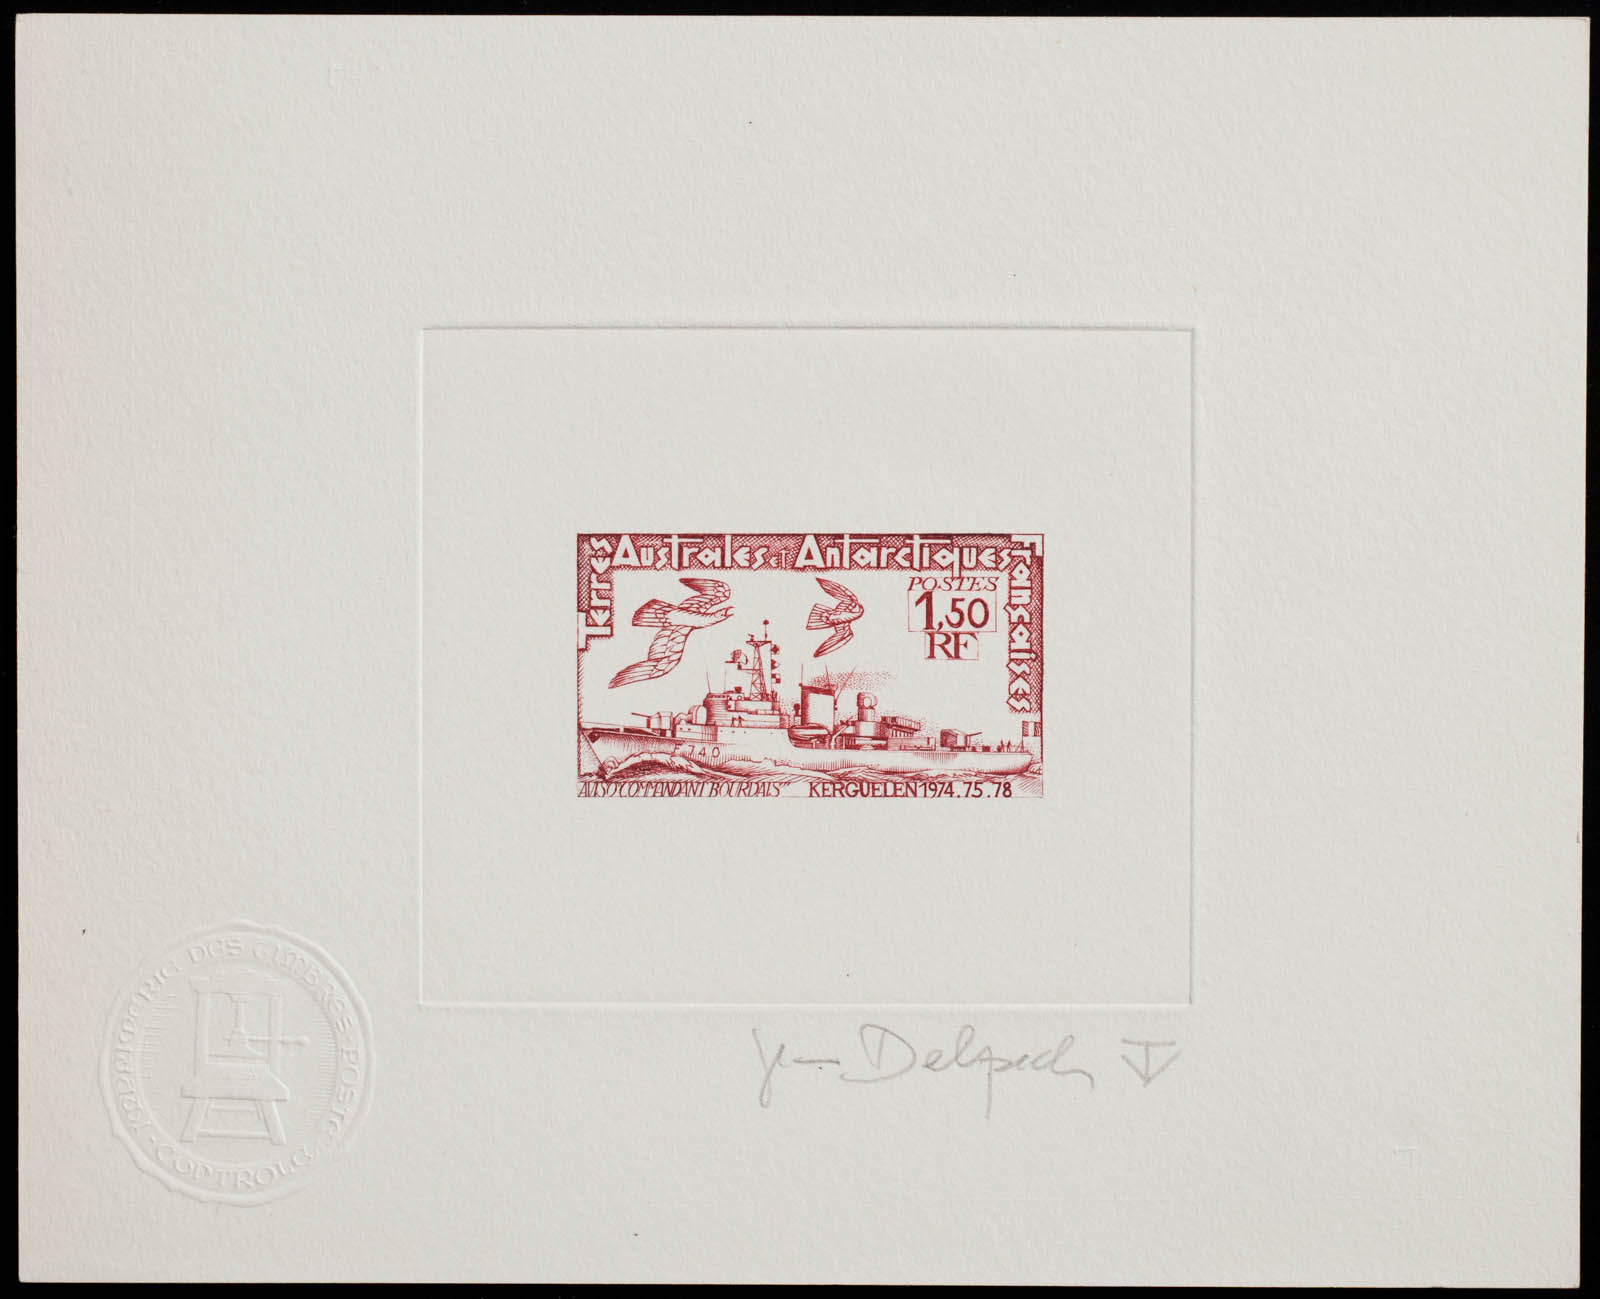 French Antarctic Bourdais Stamp Artist's Proof